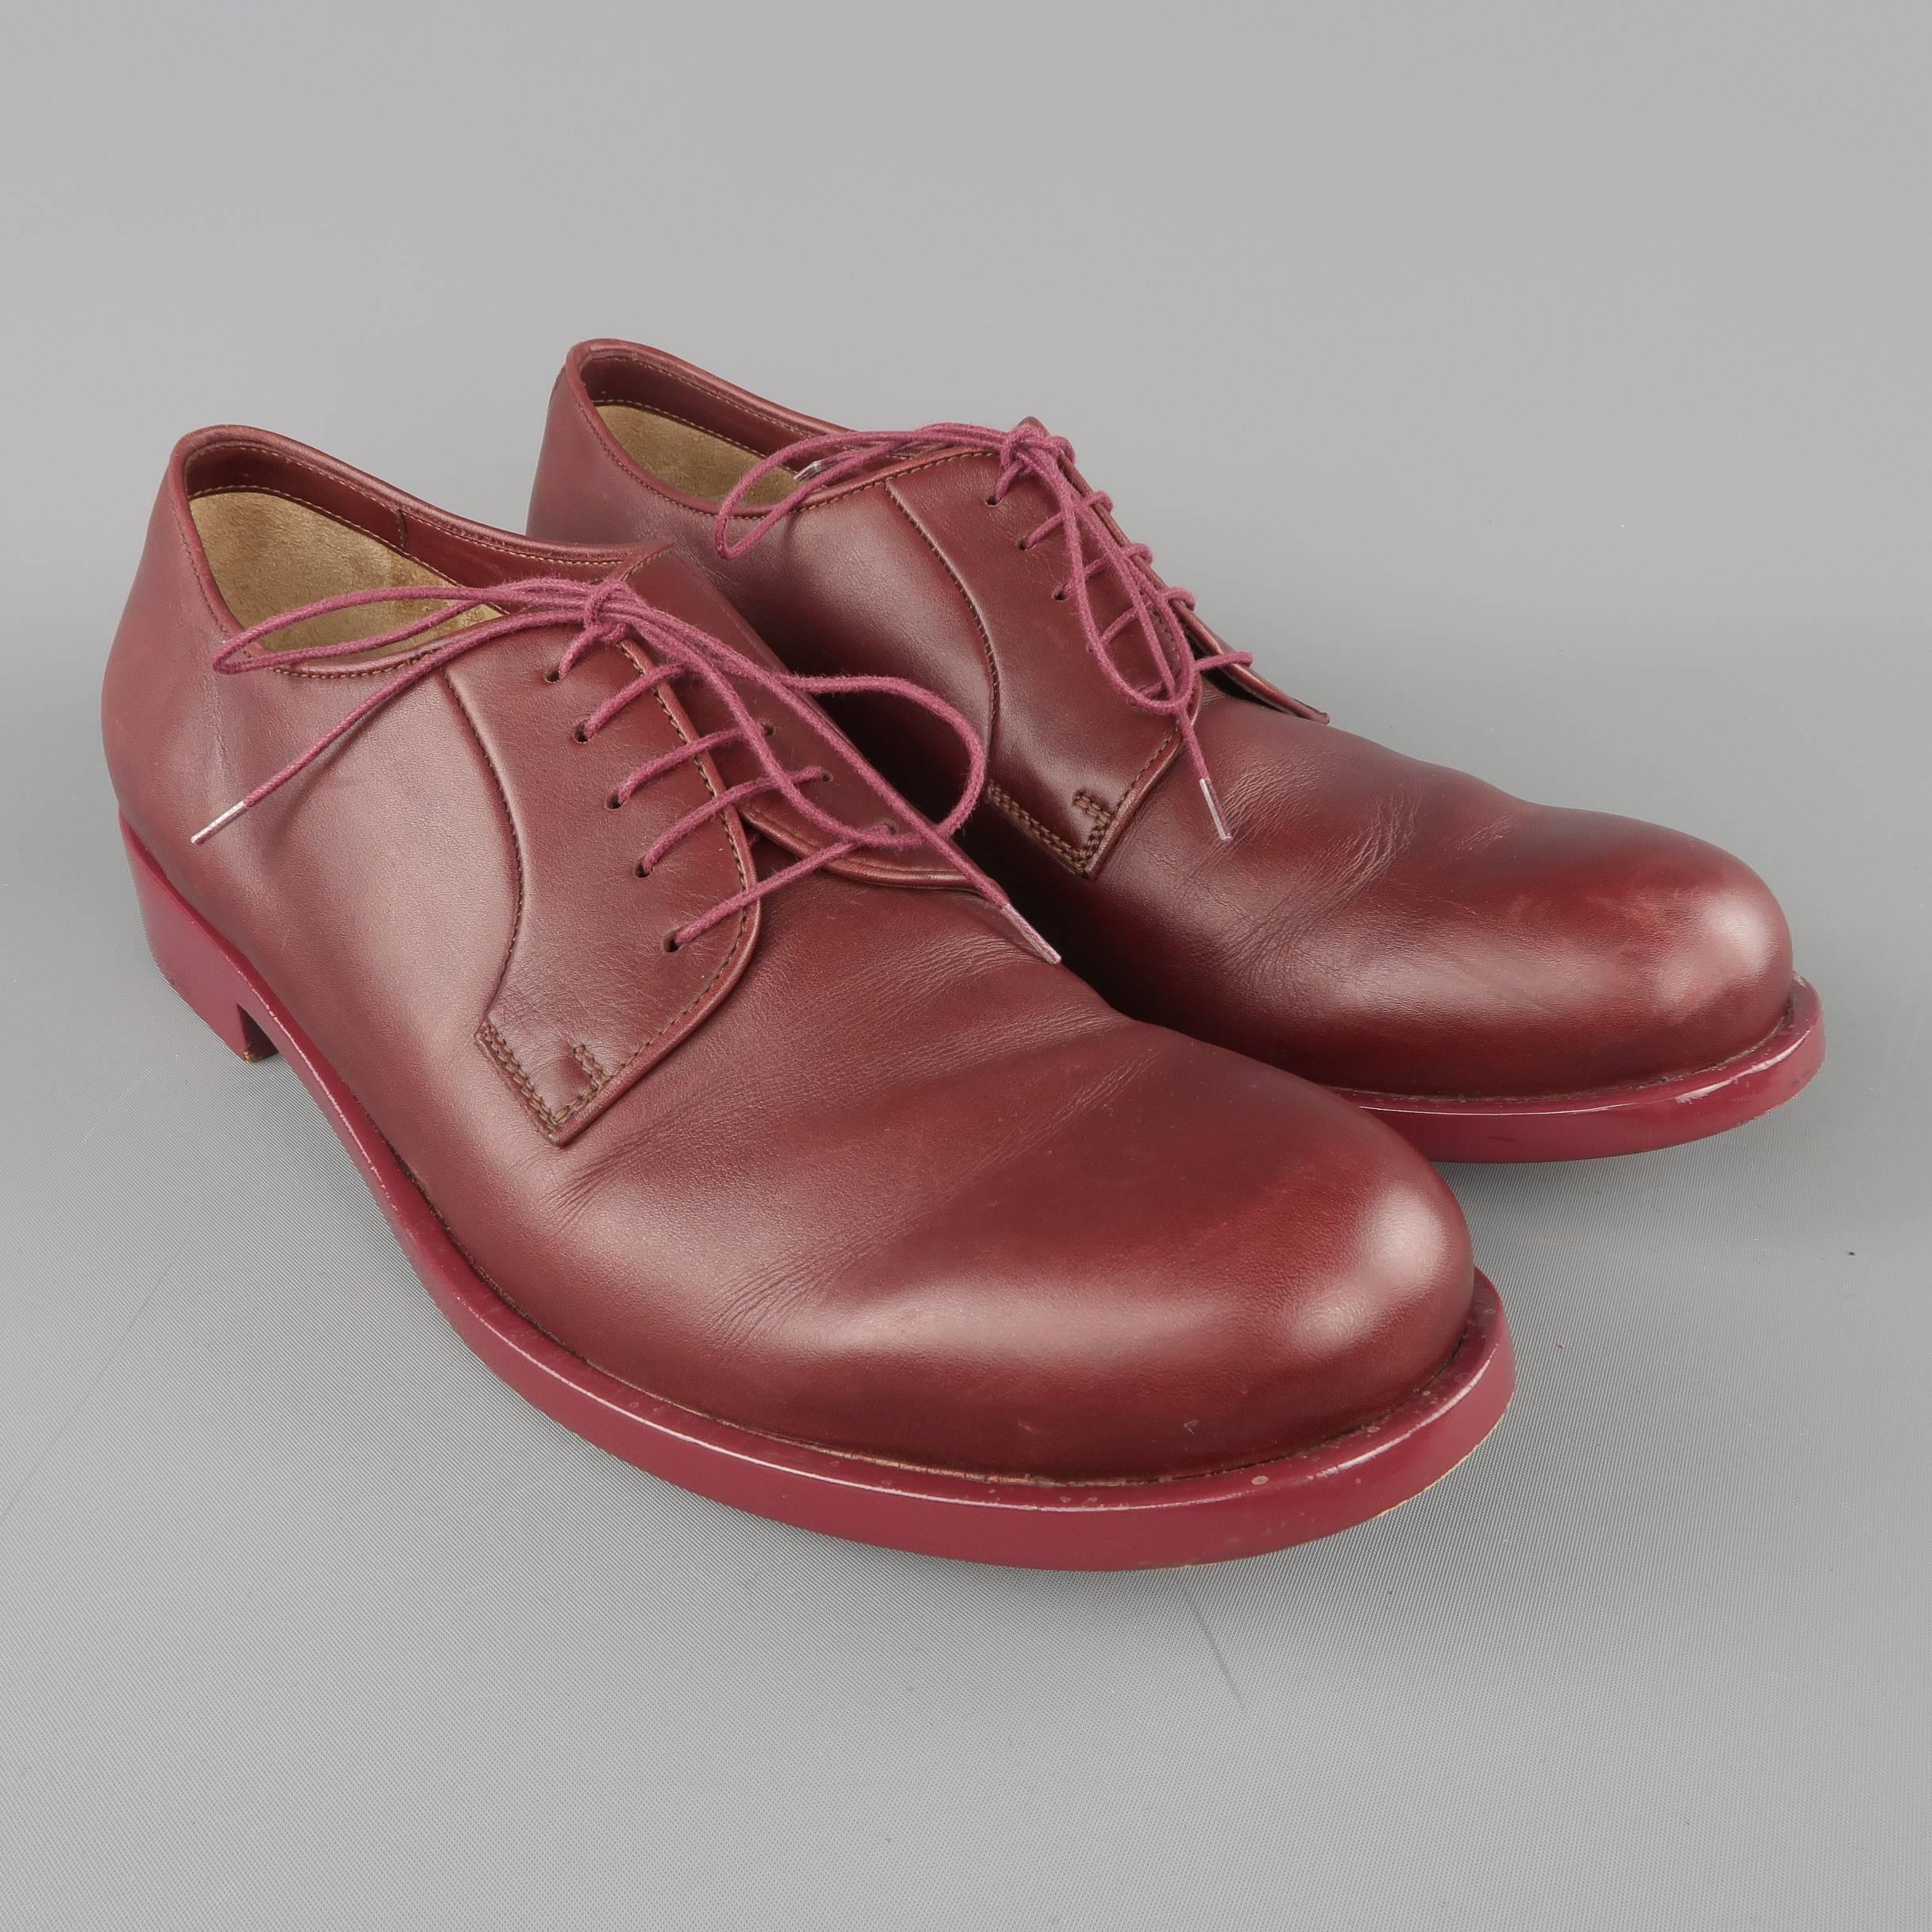 JIL SANDER derby dress shoes comes in burgundy smooth leather and feature a round toe and tonal laces and lacquered sole. Wear throughout. Made in Italy.
 
Fair Pre-Owned Condition.
Marked: IT 43
 
Outsole: 12.5 x 4 in.